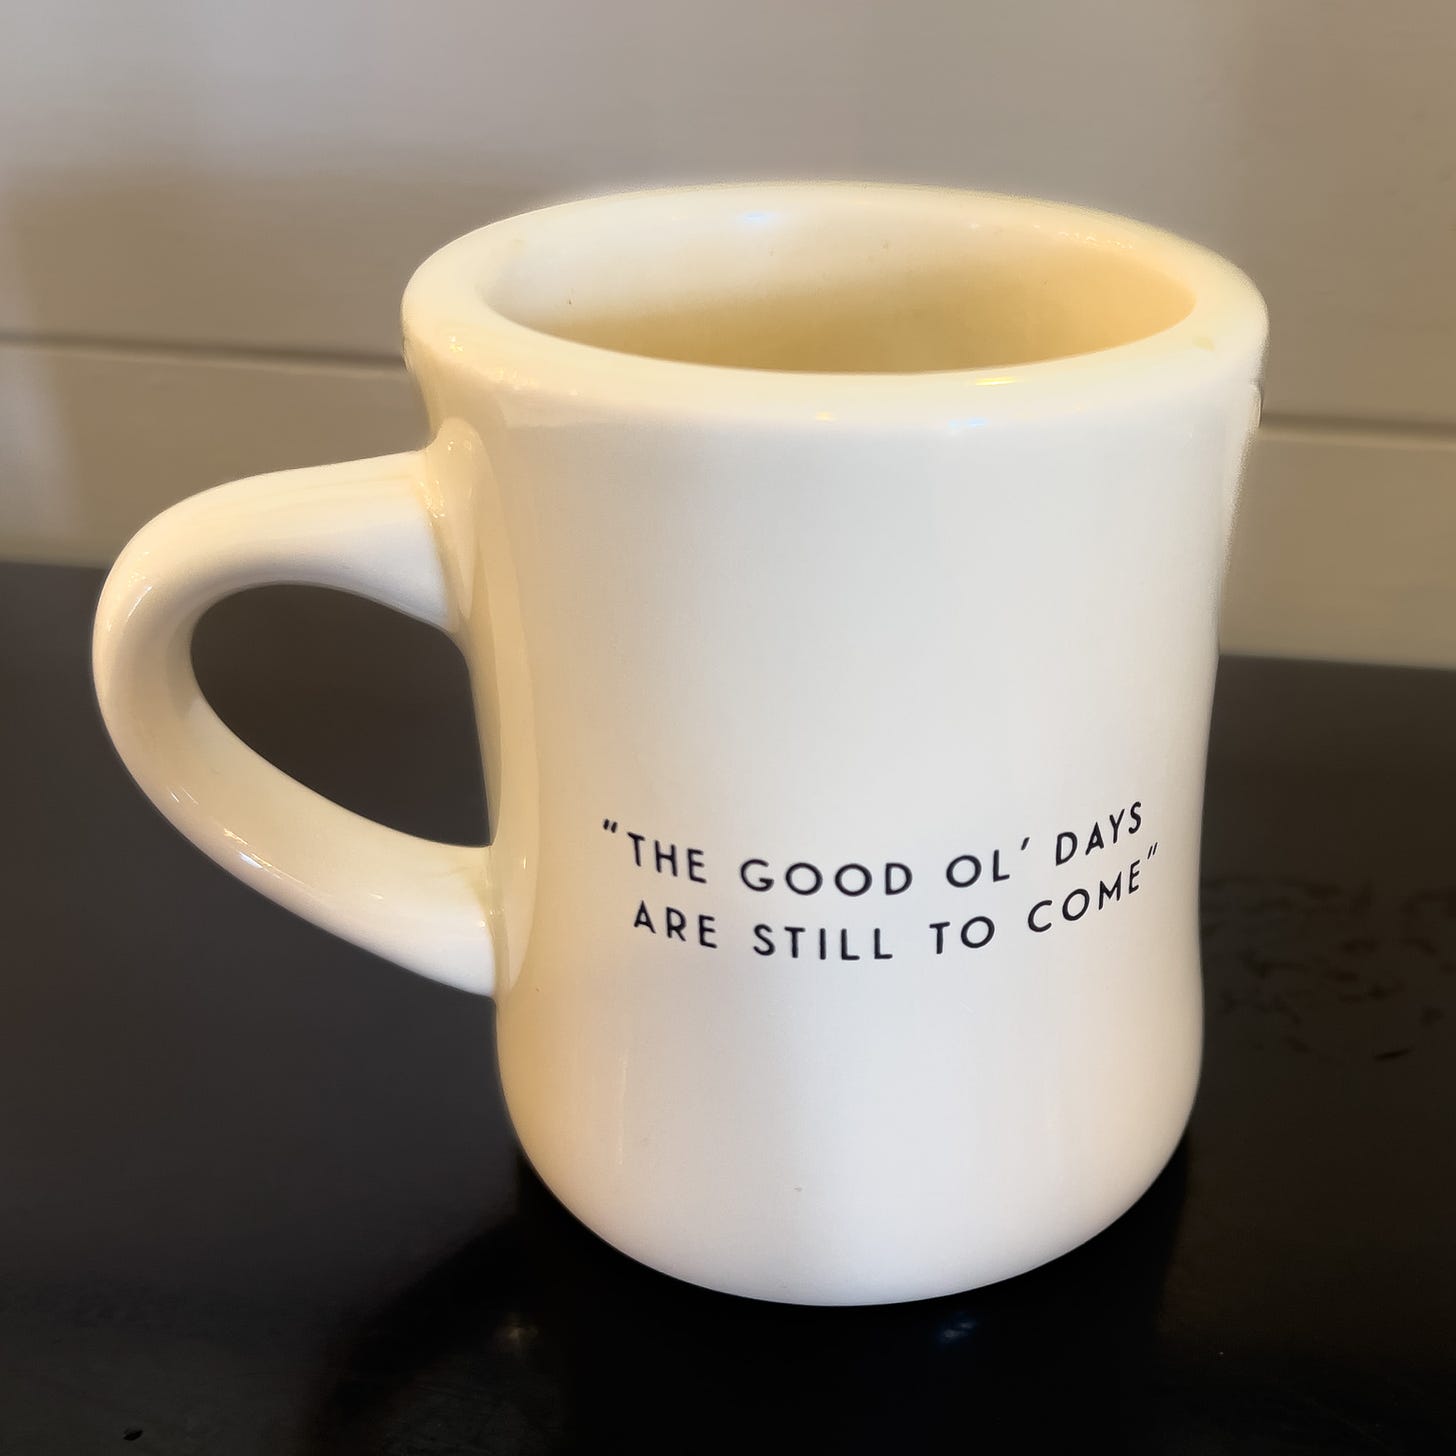 A white mug sitting on a balck table with the words” “The good ol’ days are still to come.”